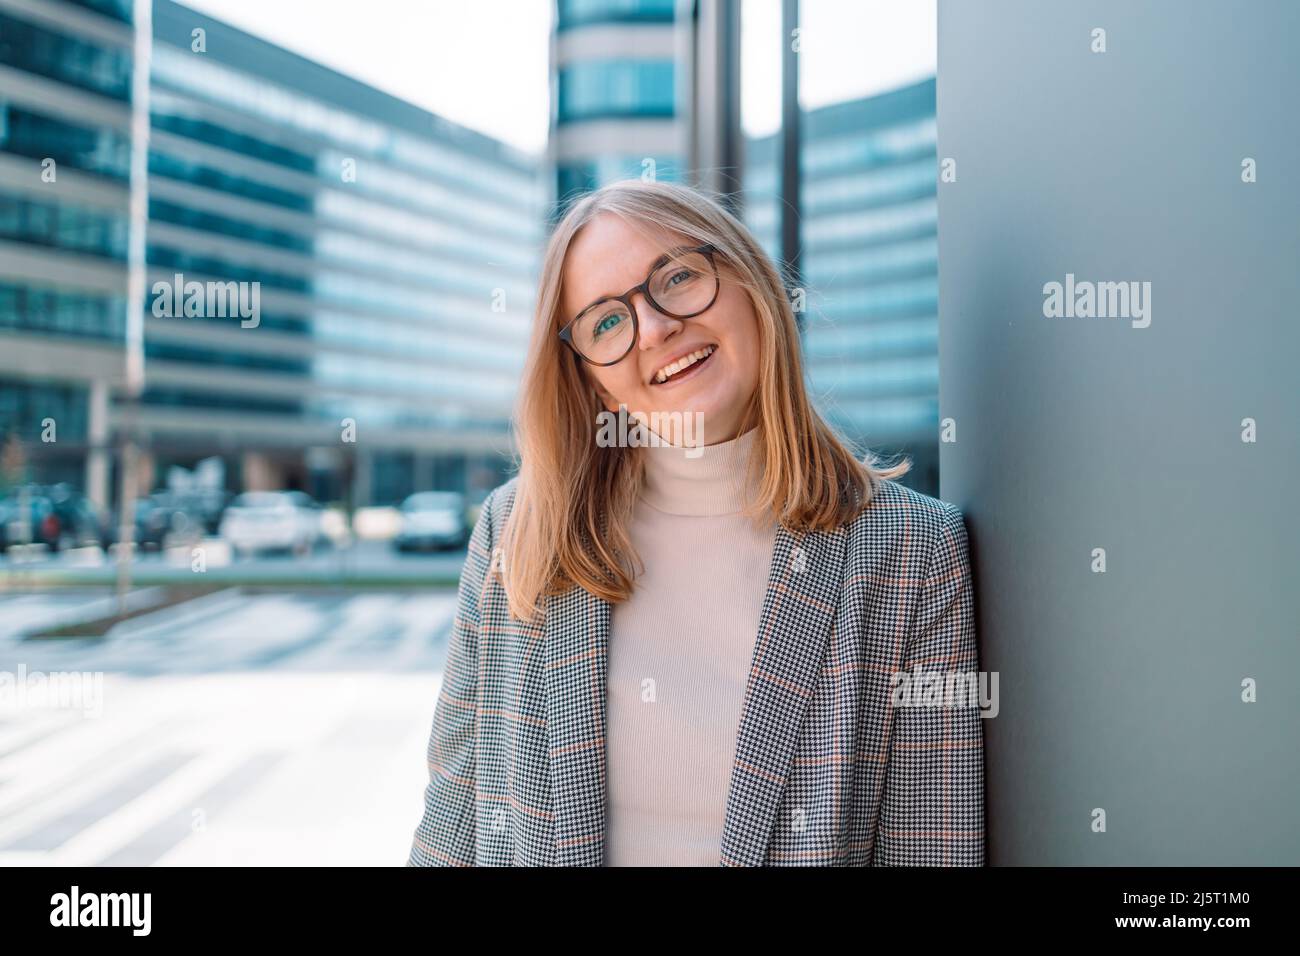 Confident businesswoman smiling at the camera in urban background. Business people concept Stock Photo